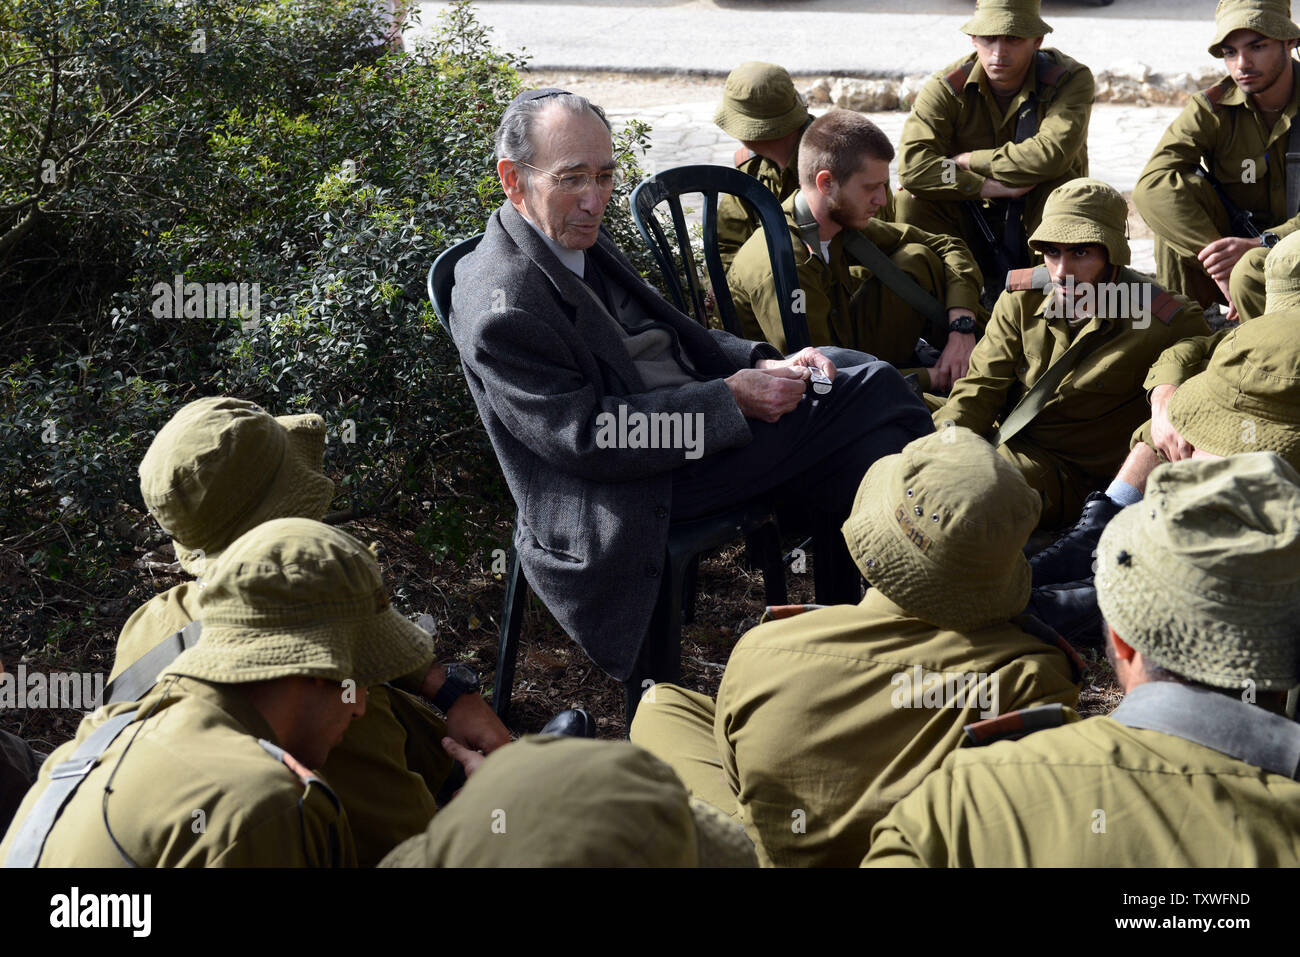 Holocaust survivor Meir Friedmann, 87, shares his personal testimony with Israeli combat soldiers during a Holocaust commemoration event on Holocaust Martyrs' and Heroes' Remembrance Day, in the Martyr's Forest "Scroll of Fire", outside of Jerusalem, Israel, April 8, 2013.  UPI/Debbie Hill Stock Photo